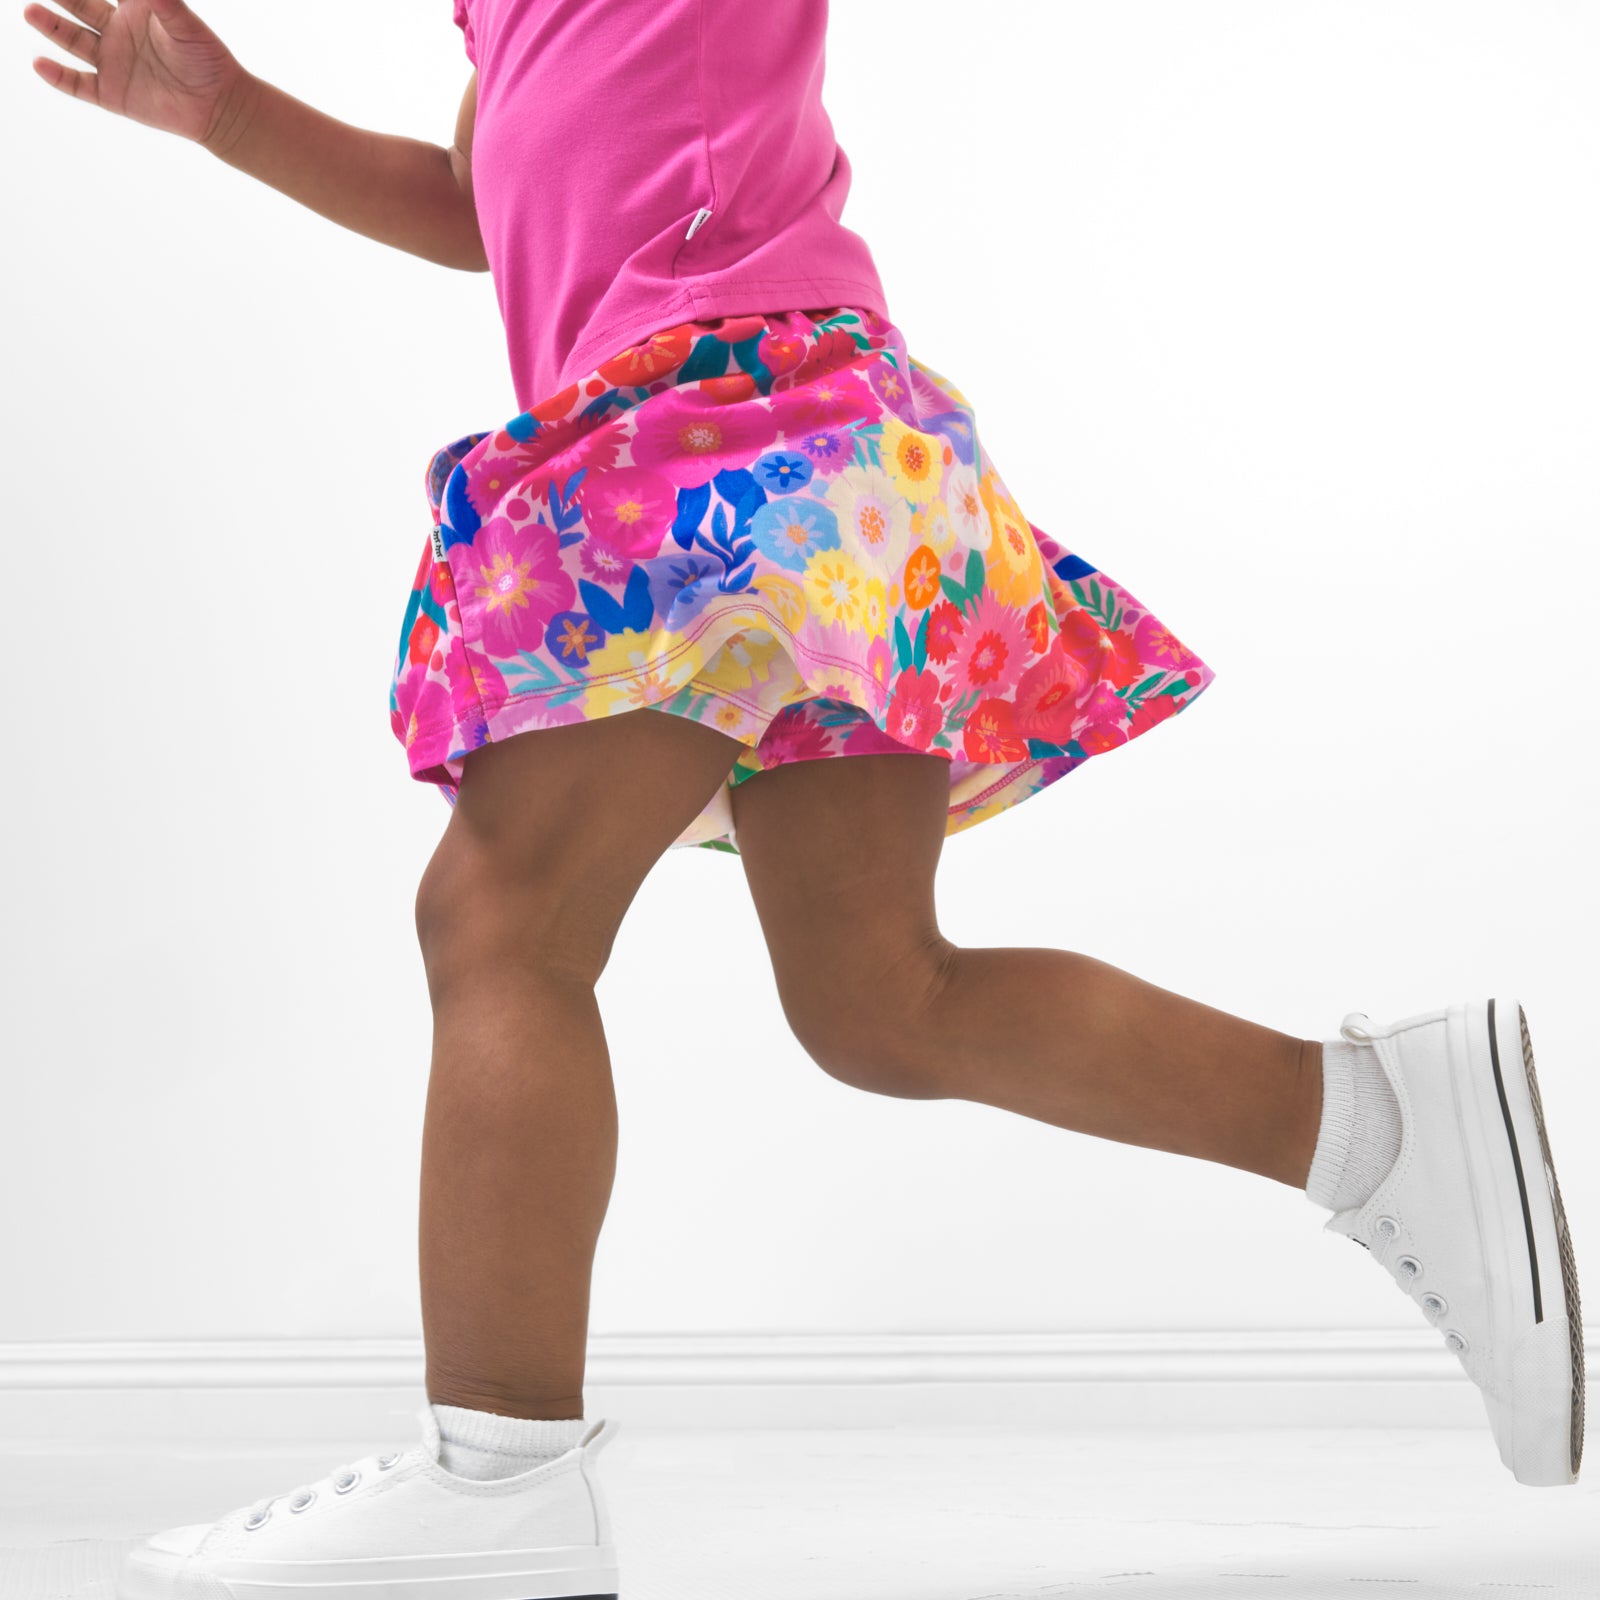 Alternate close up side view image of a child wearing a Rainbow Blooms skort and coordinating top